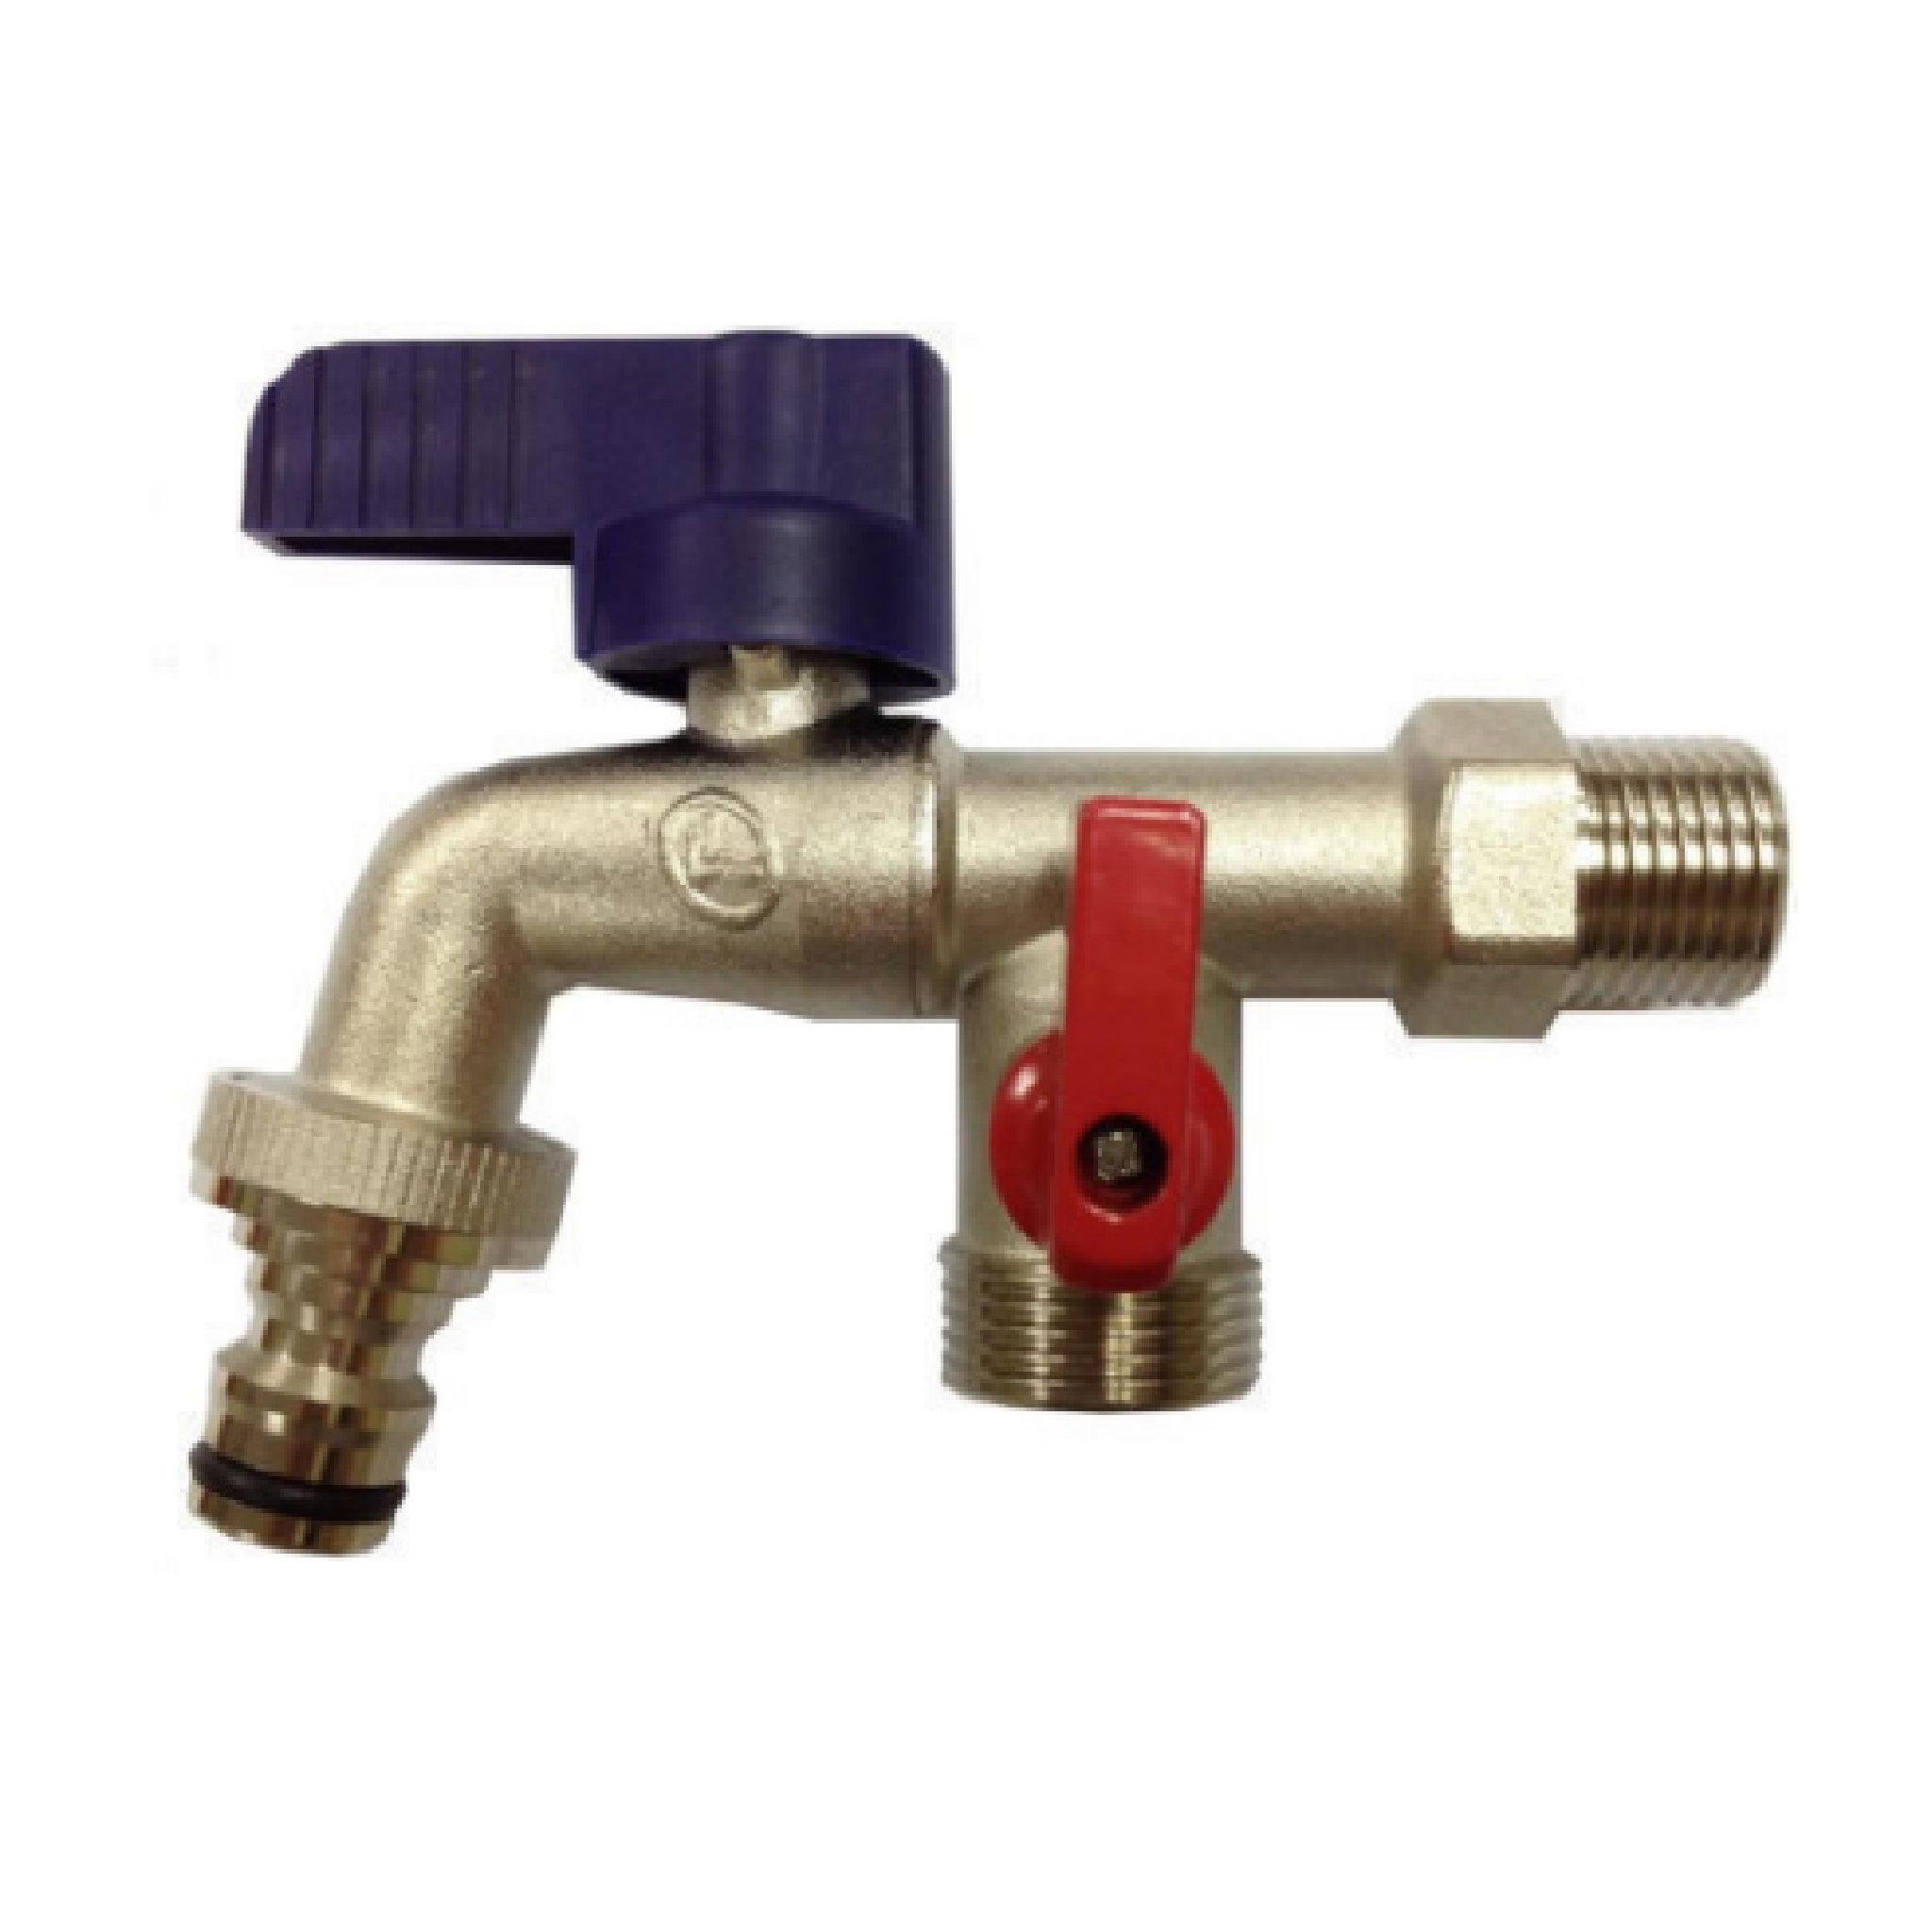 DOUBLE-LIN 2-WAY Bib Tap With 3/4" Nozzle